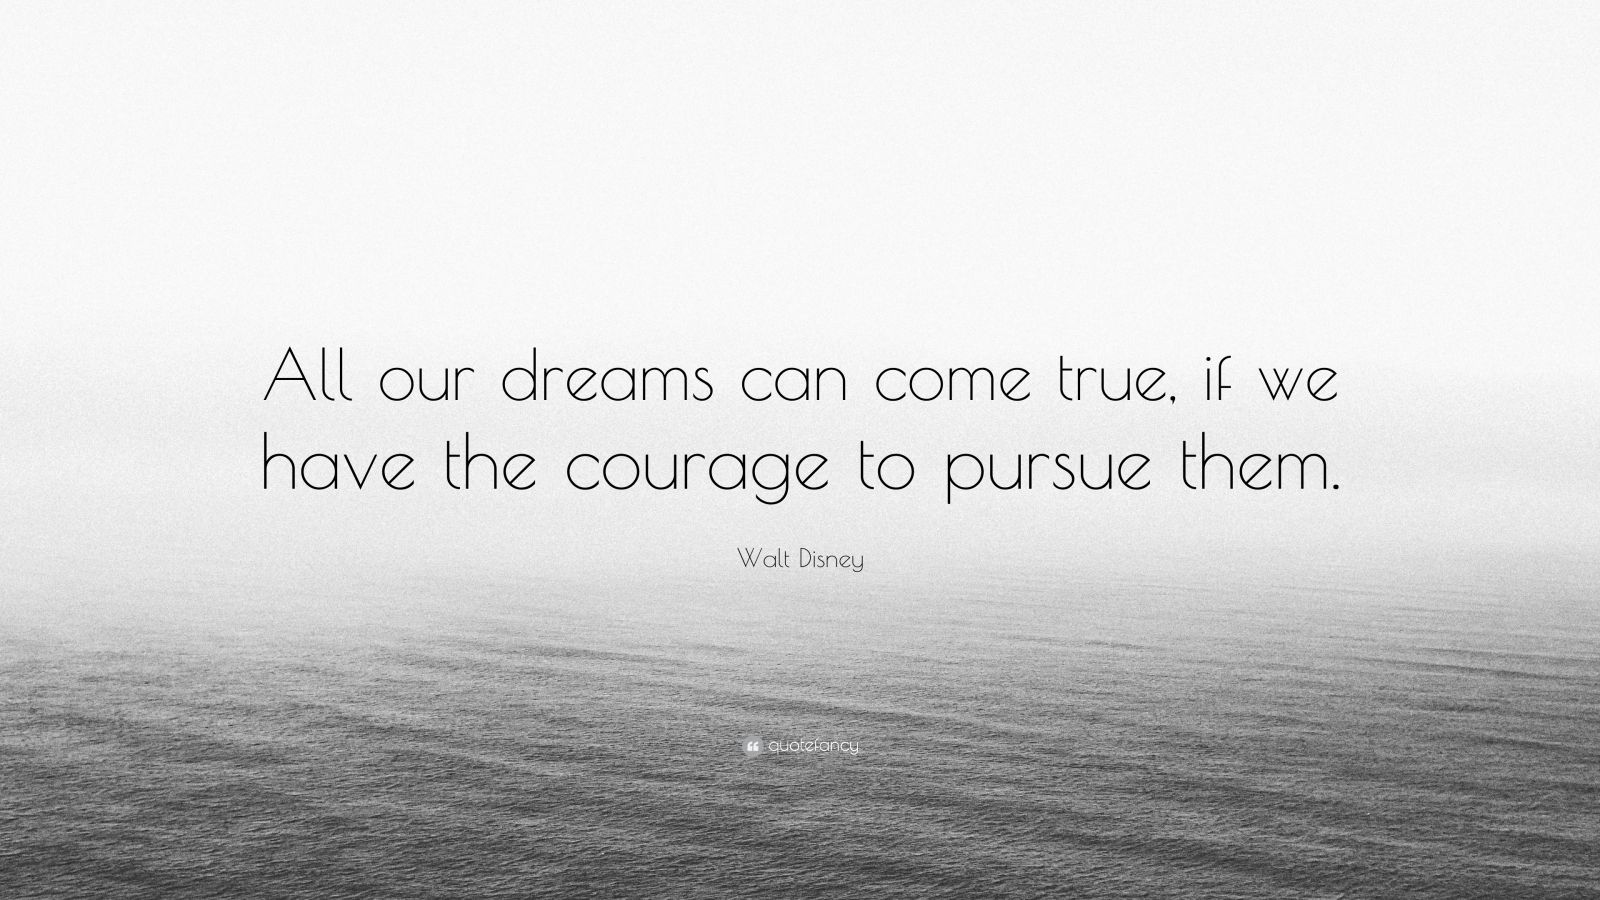 Walt Disney Quote: “All our dreams can come true, if we have the ...